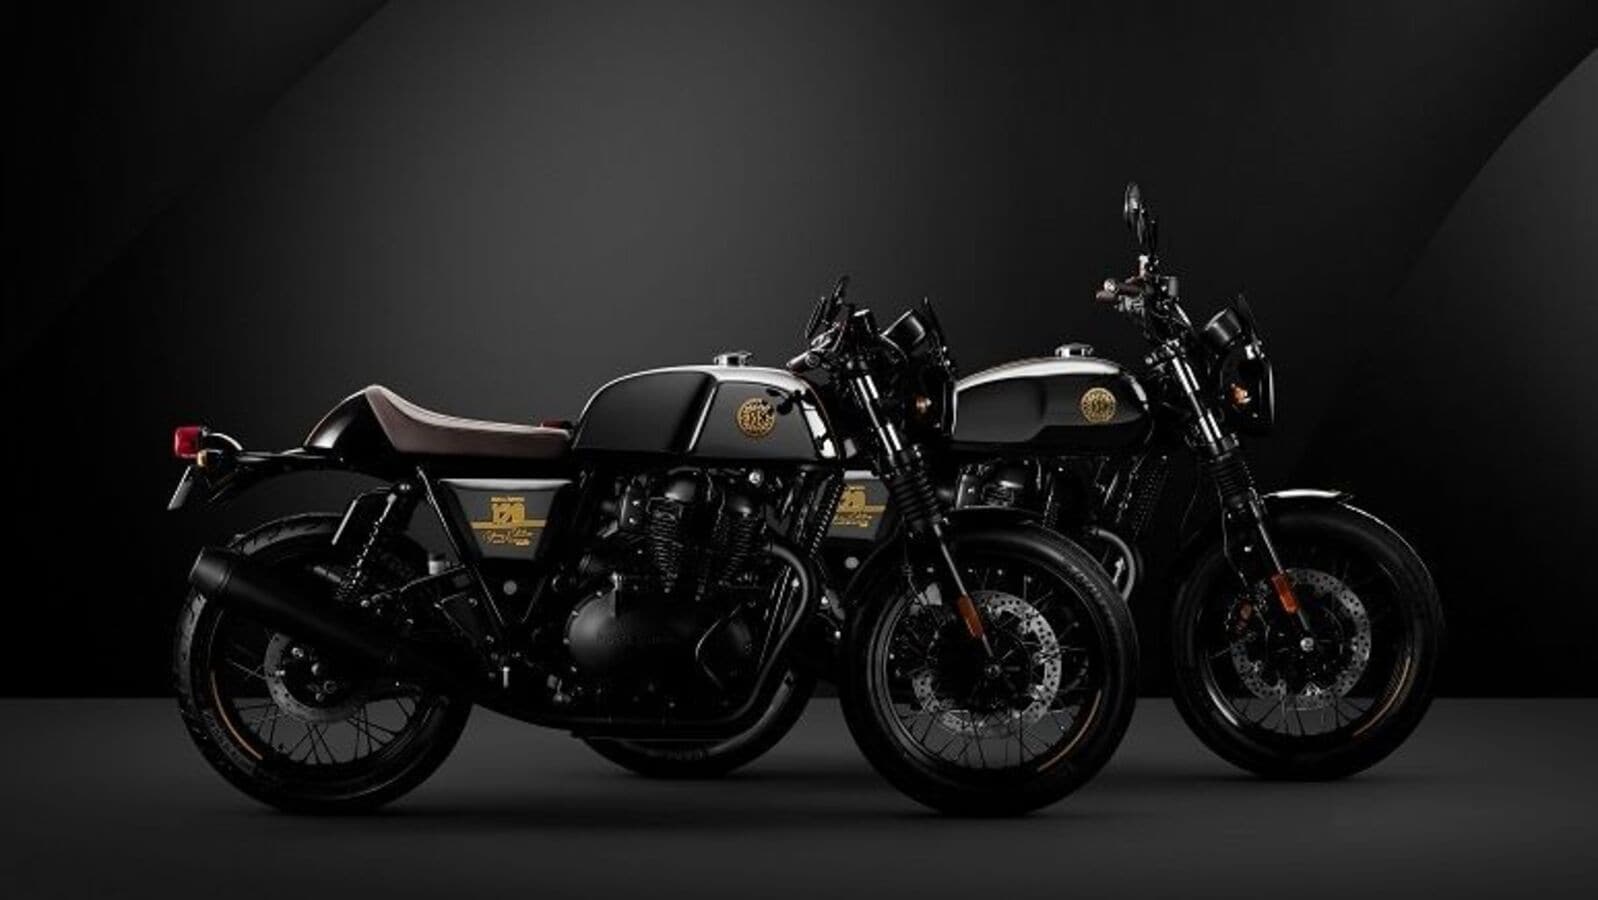 Special edition Royal Enfield 650 Twins sold out in Australia | Bike News